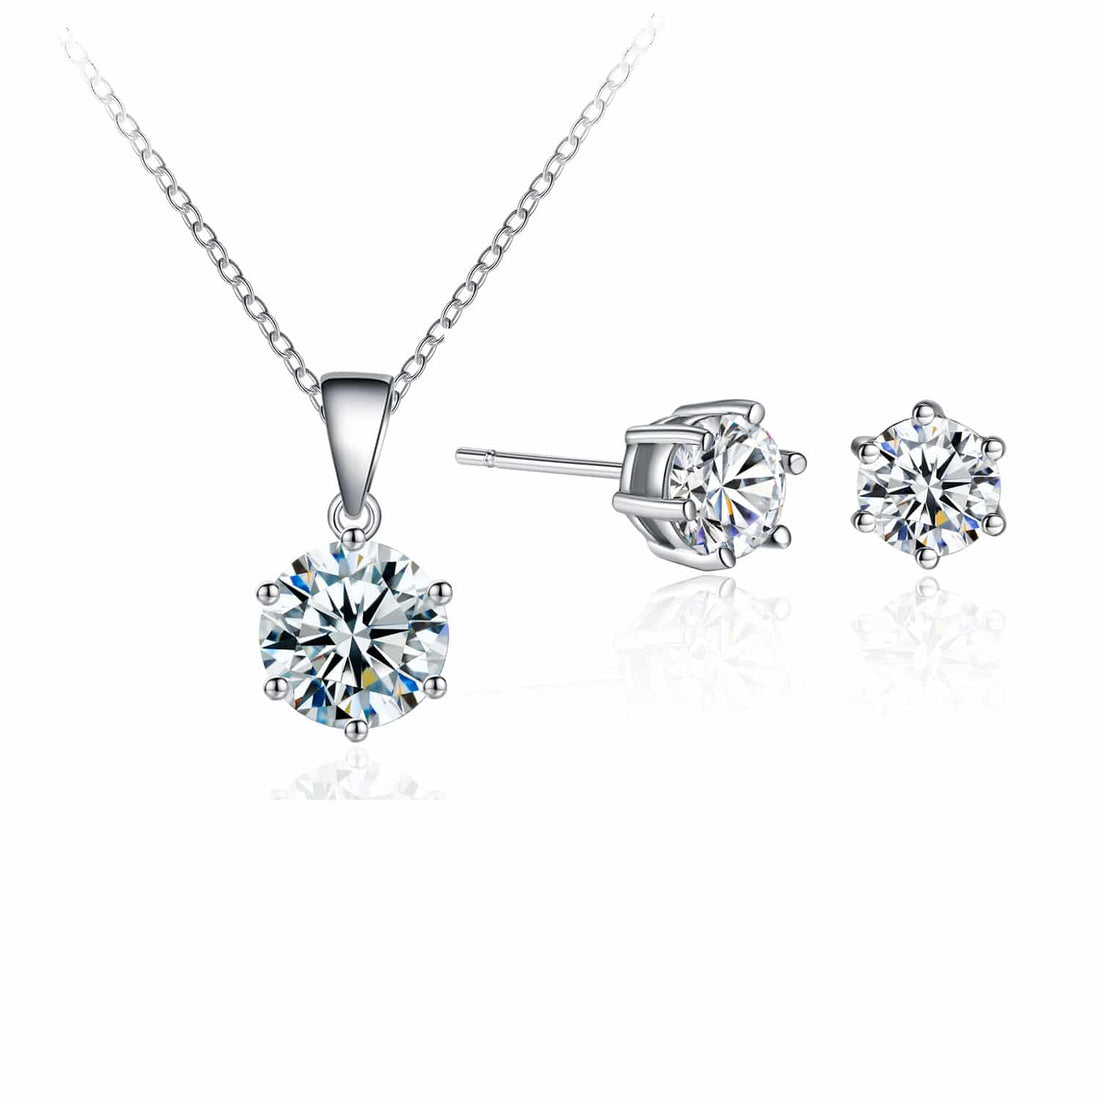 Solitaire Pendant, Stud Earings Made with Fine Austrian Crystals and Single Row Tennis Bracelet